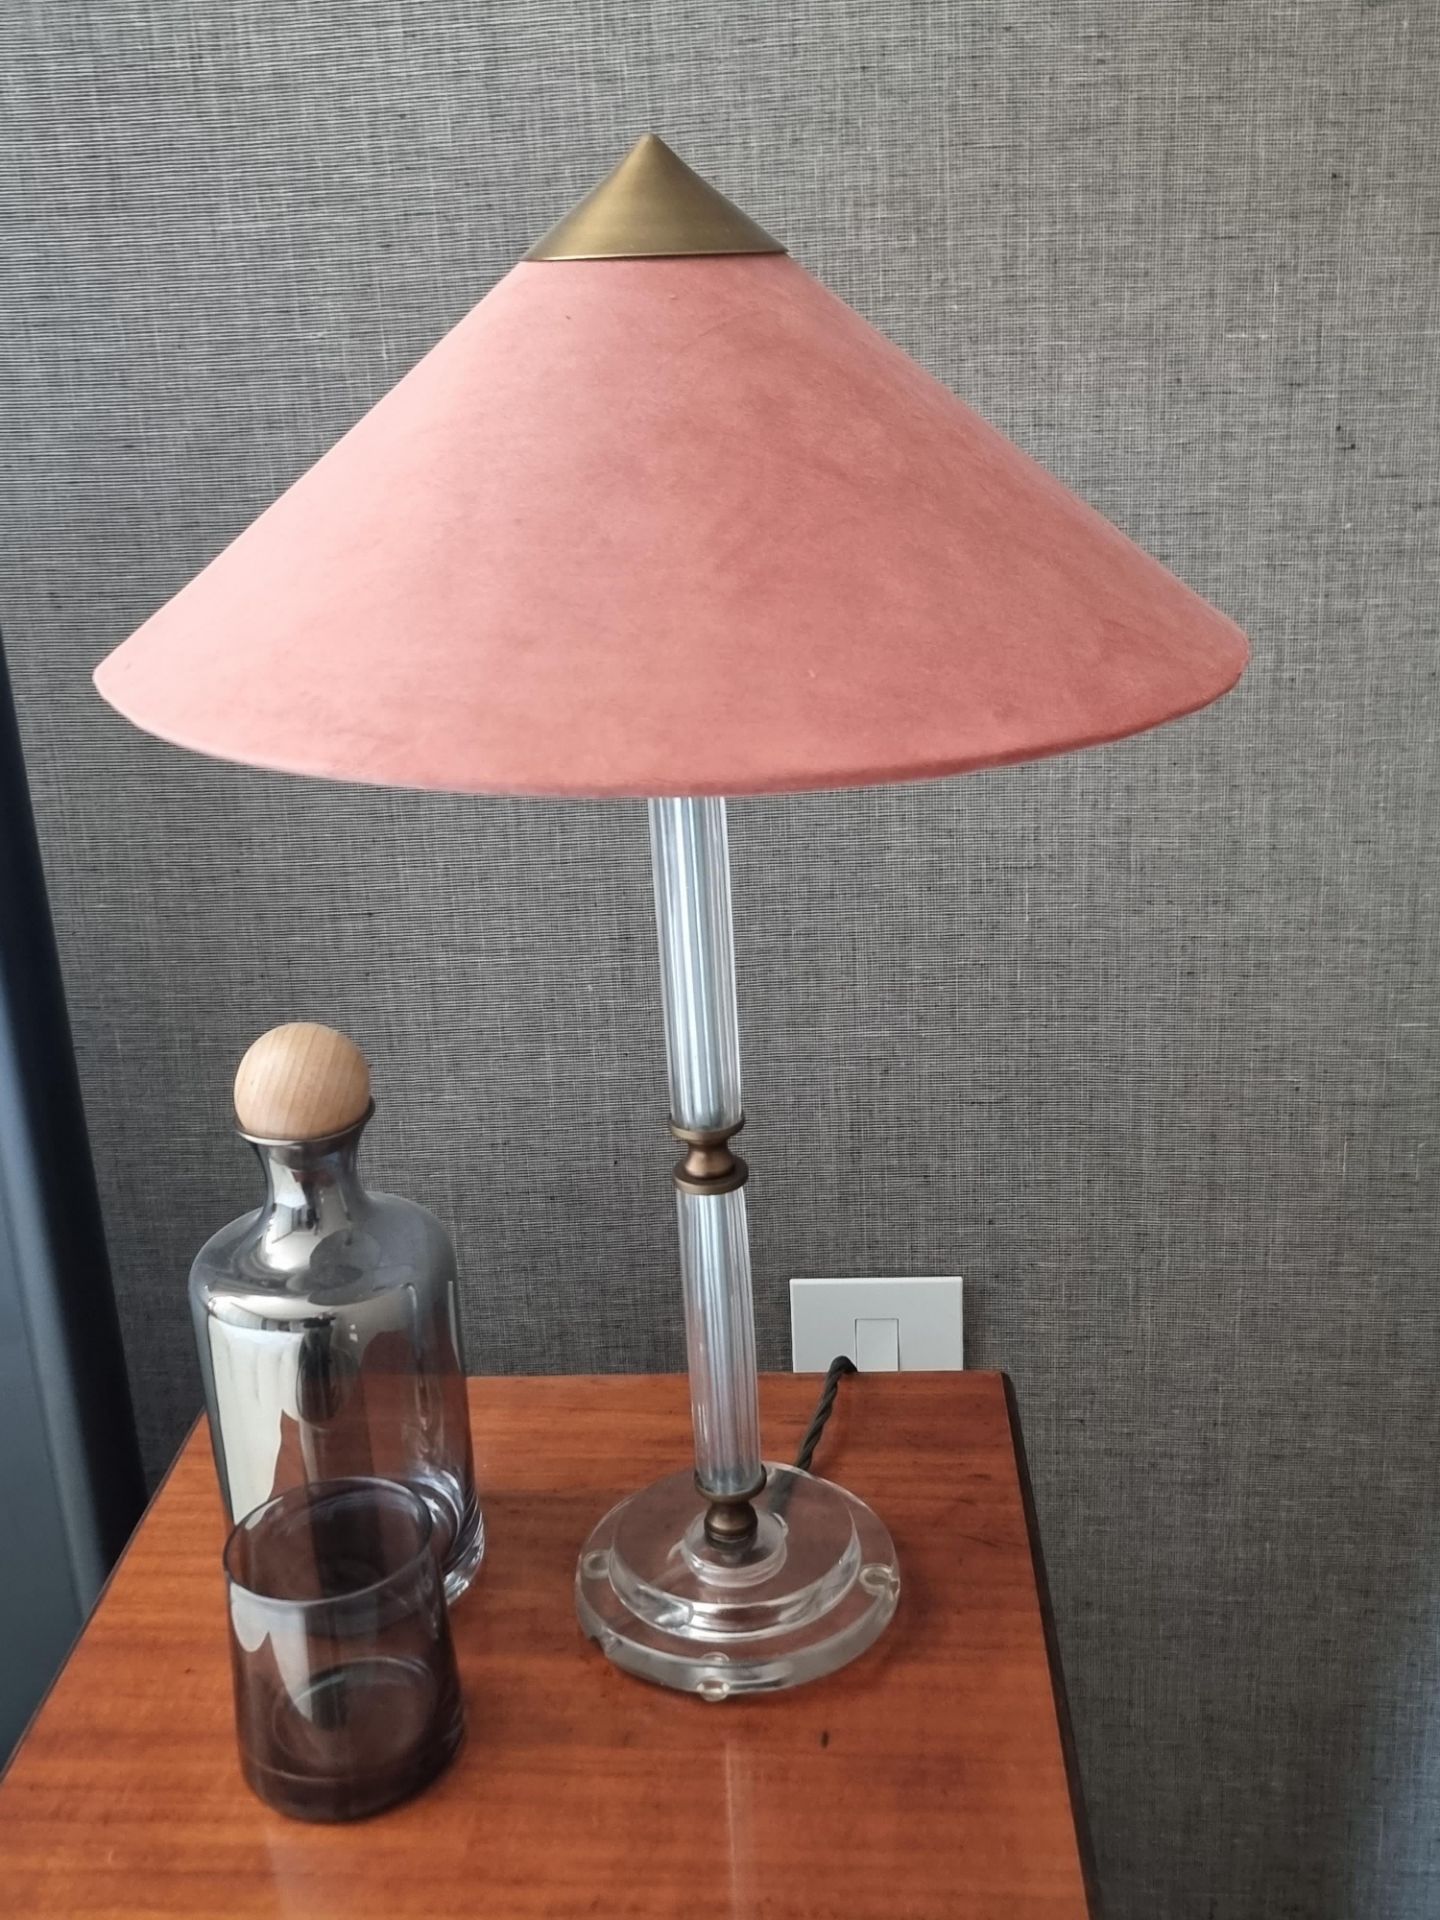 A pair of Acrylic Table lamps with pink suede shade  55cm tall (Apt 1) - Image 2 of 2